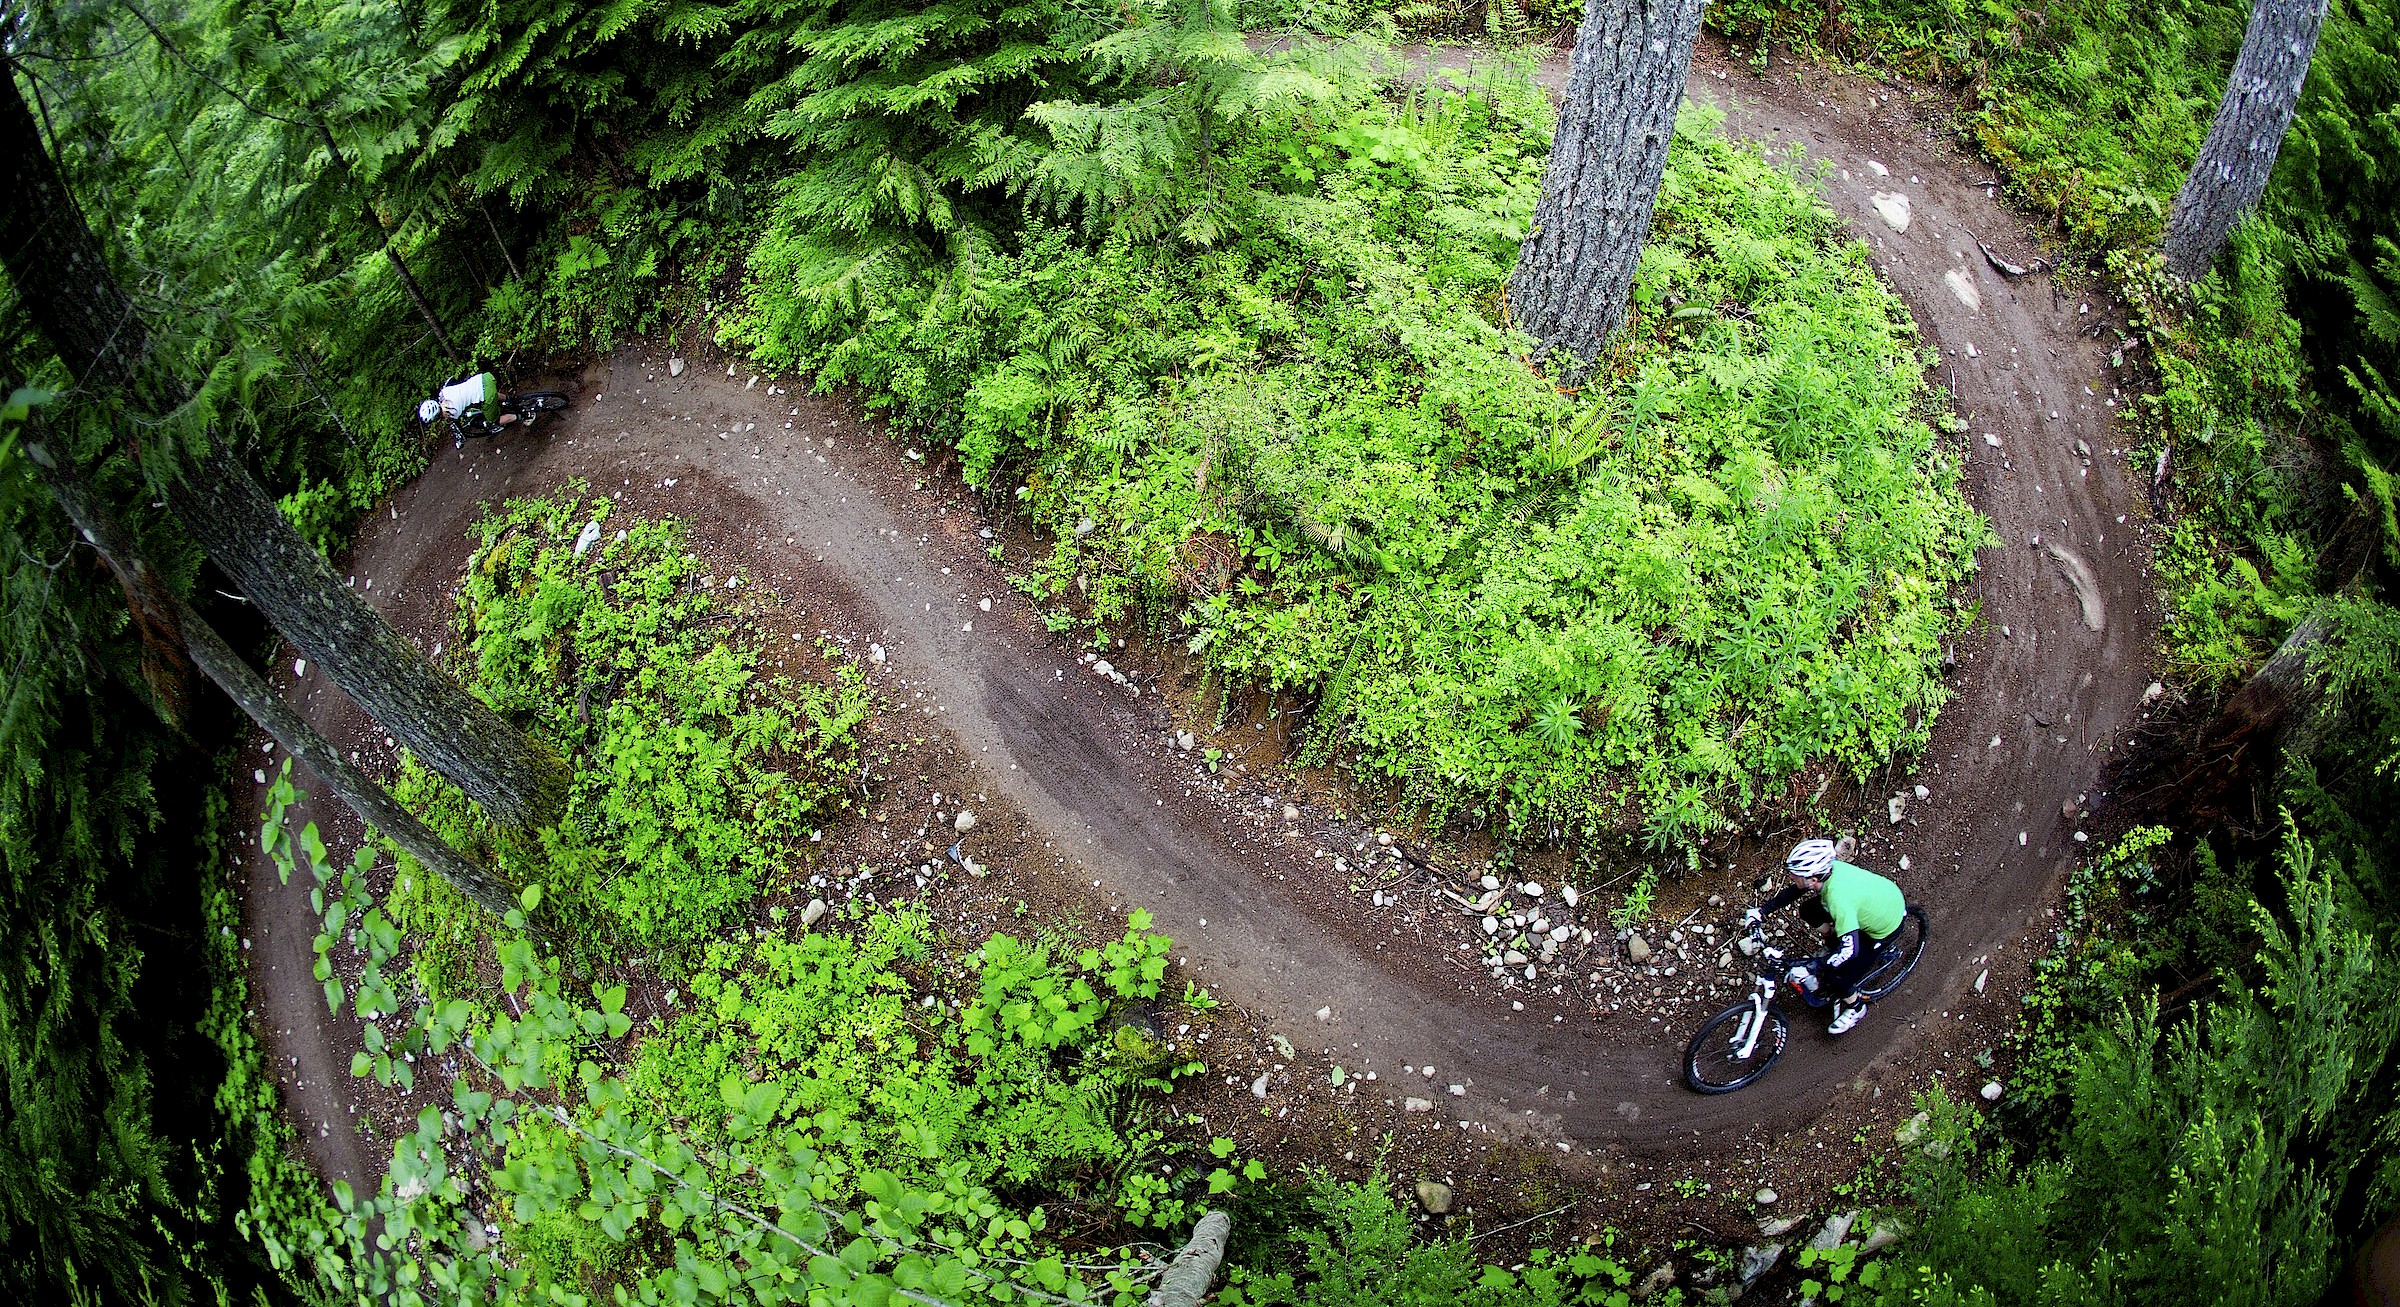 Two mountain bikers riding in the forest in Squamish